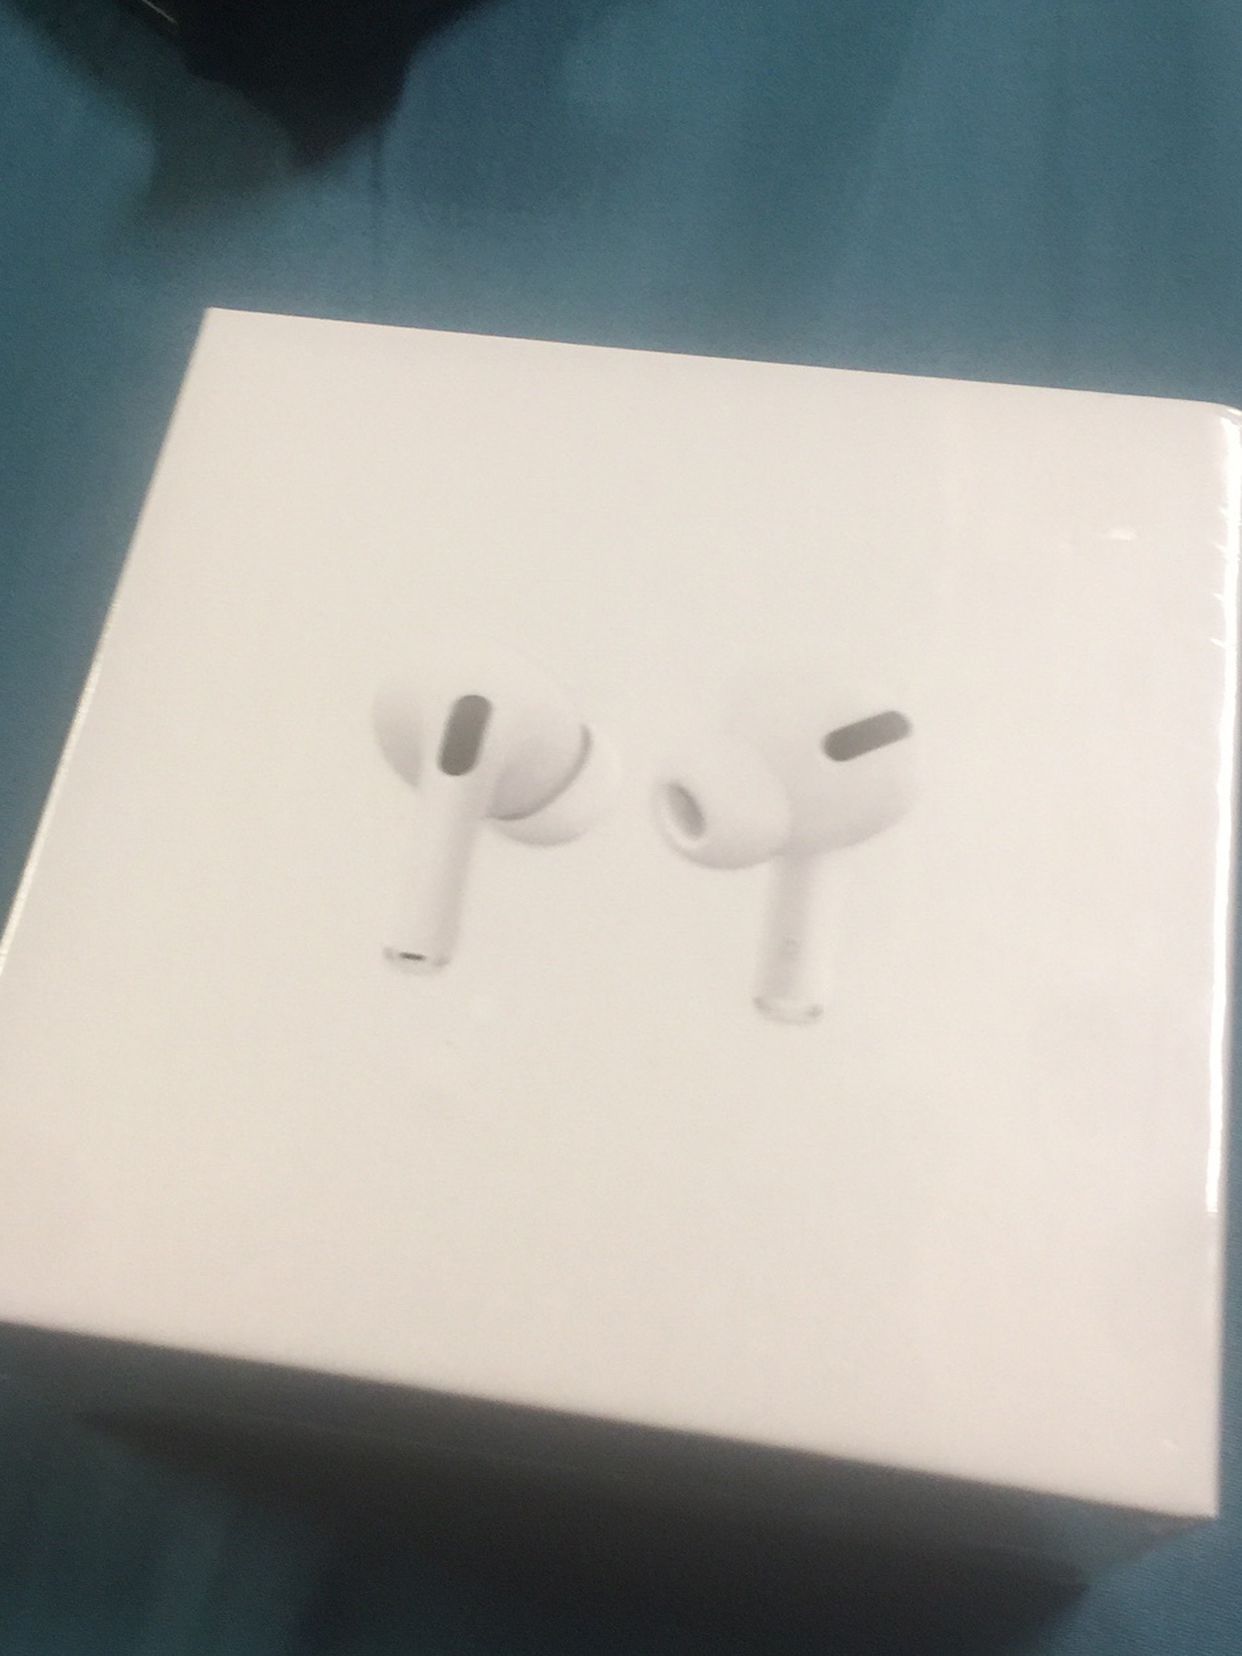 Apple AirPods Pro (Brand New, Never Opened)